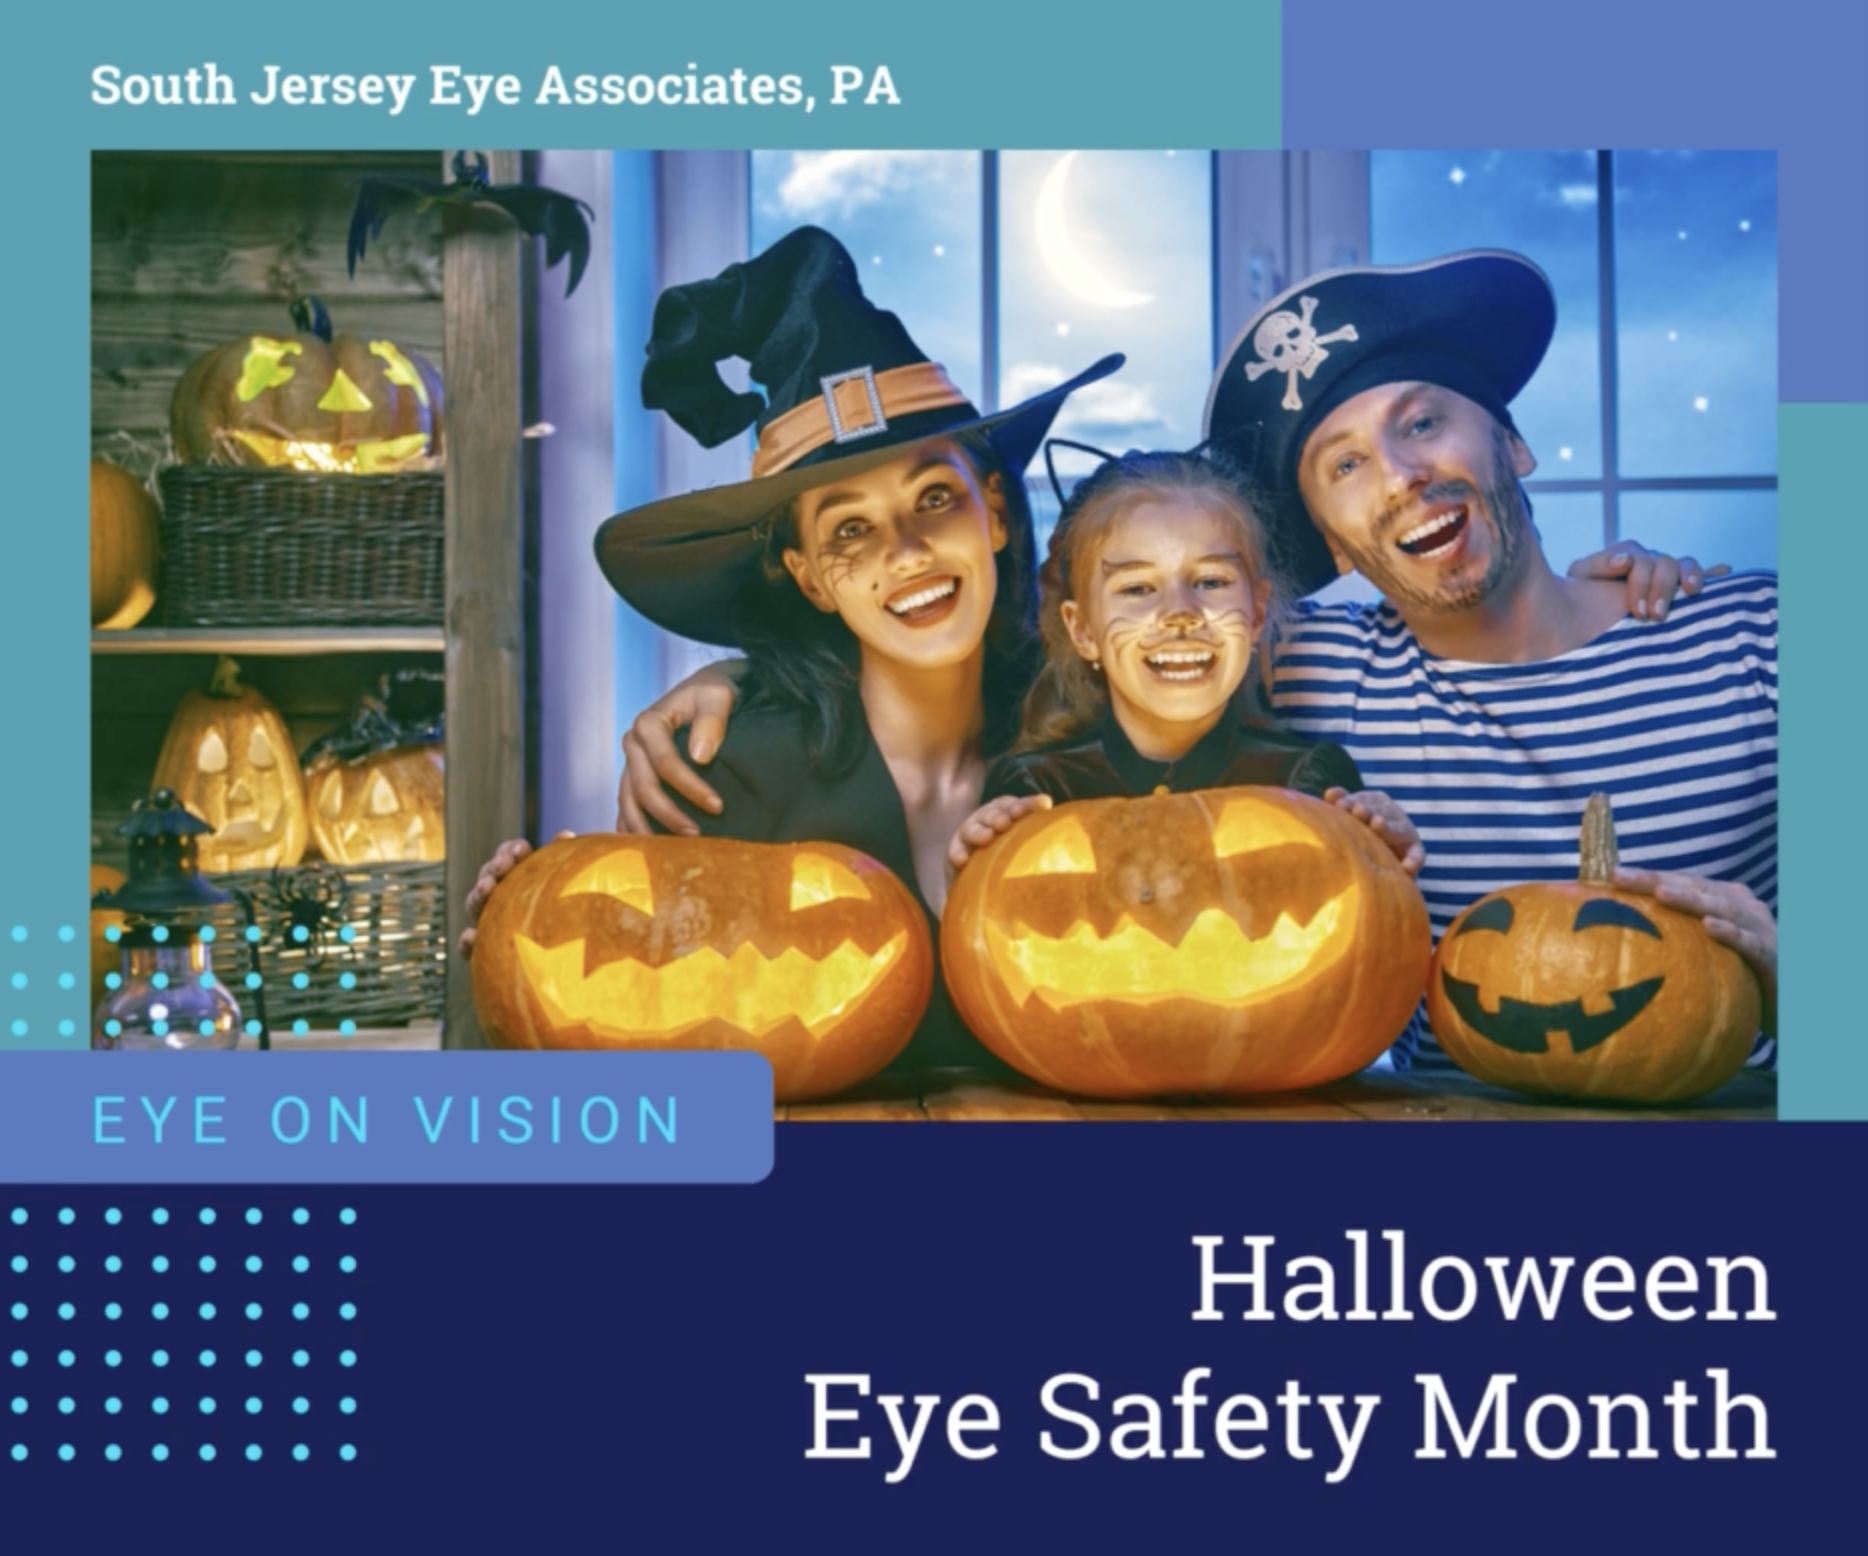 October is Halloween Eye Safety Month